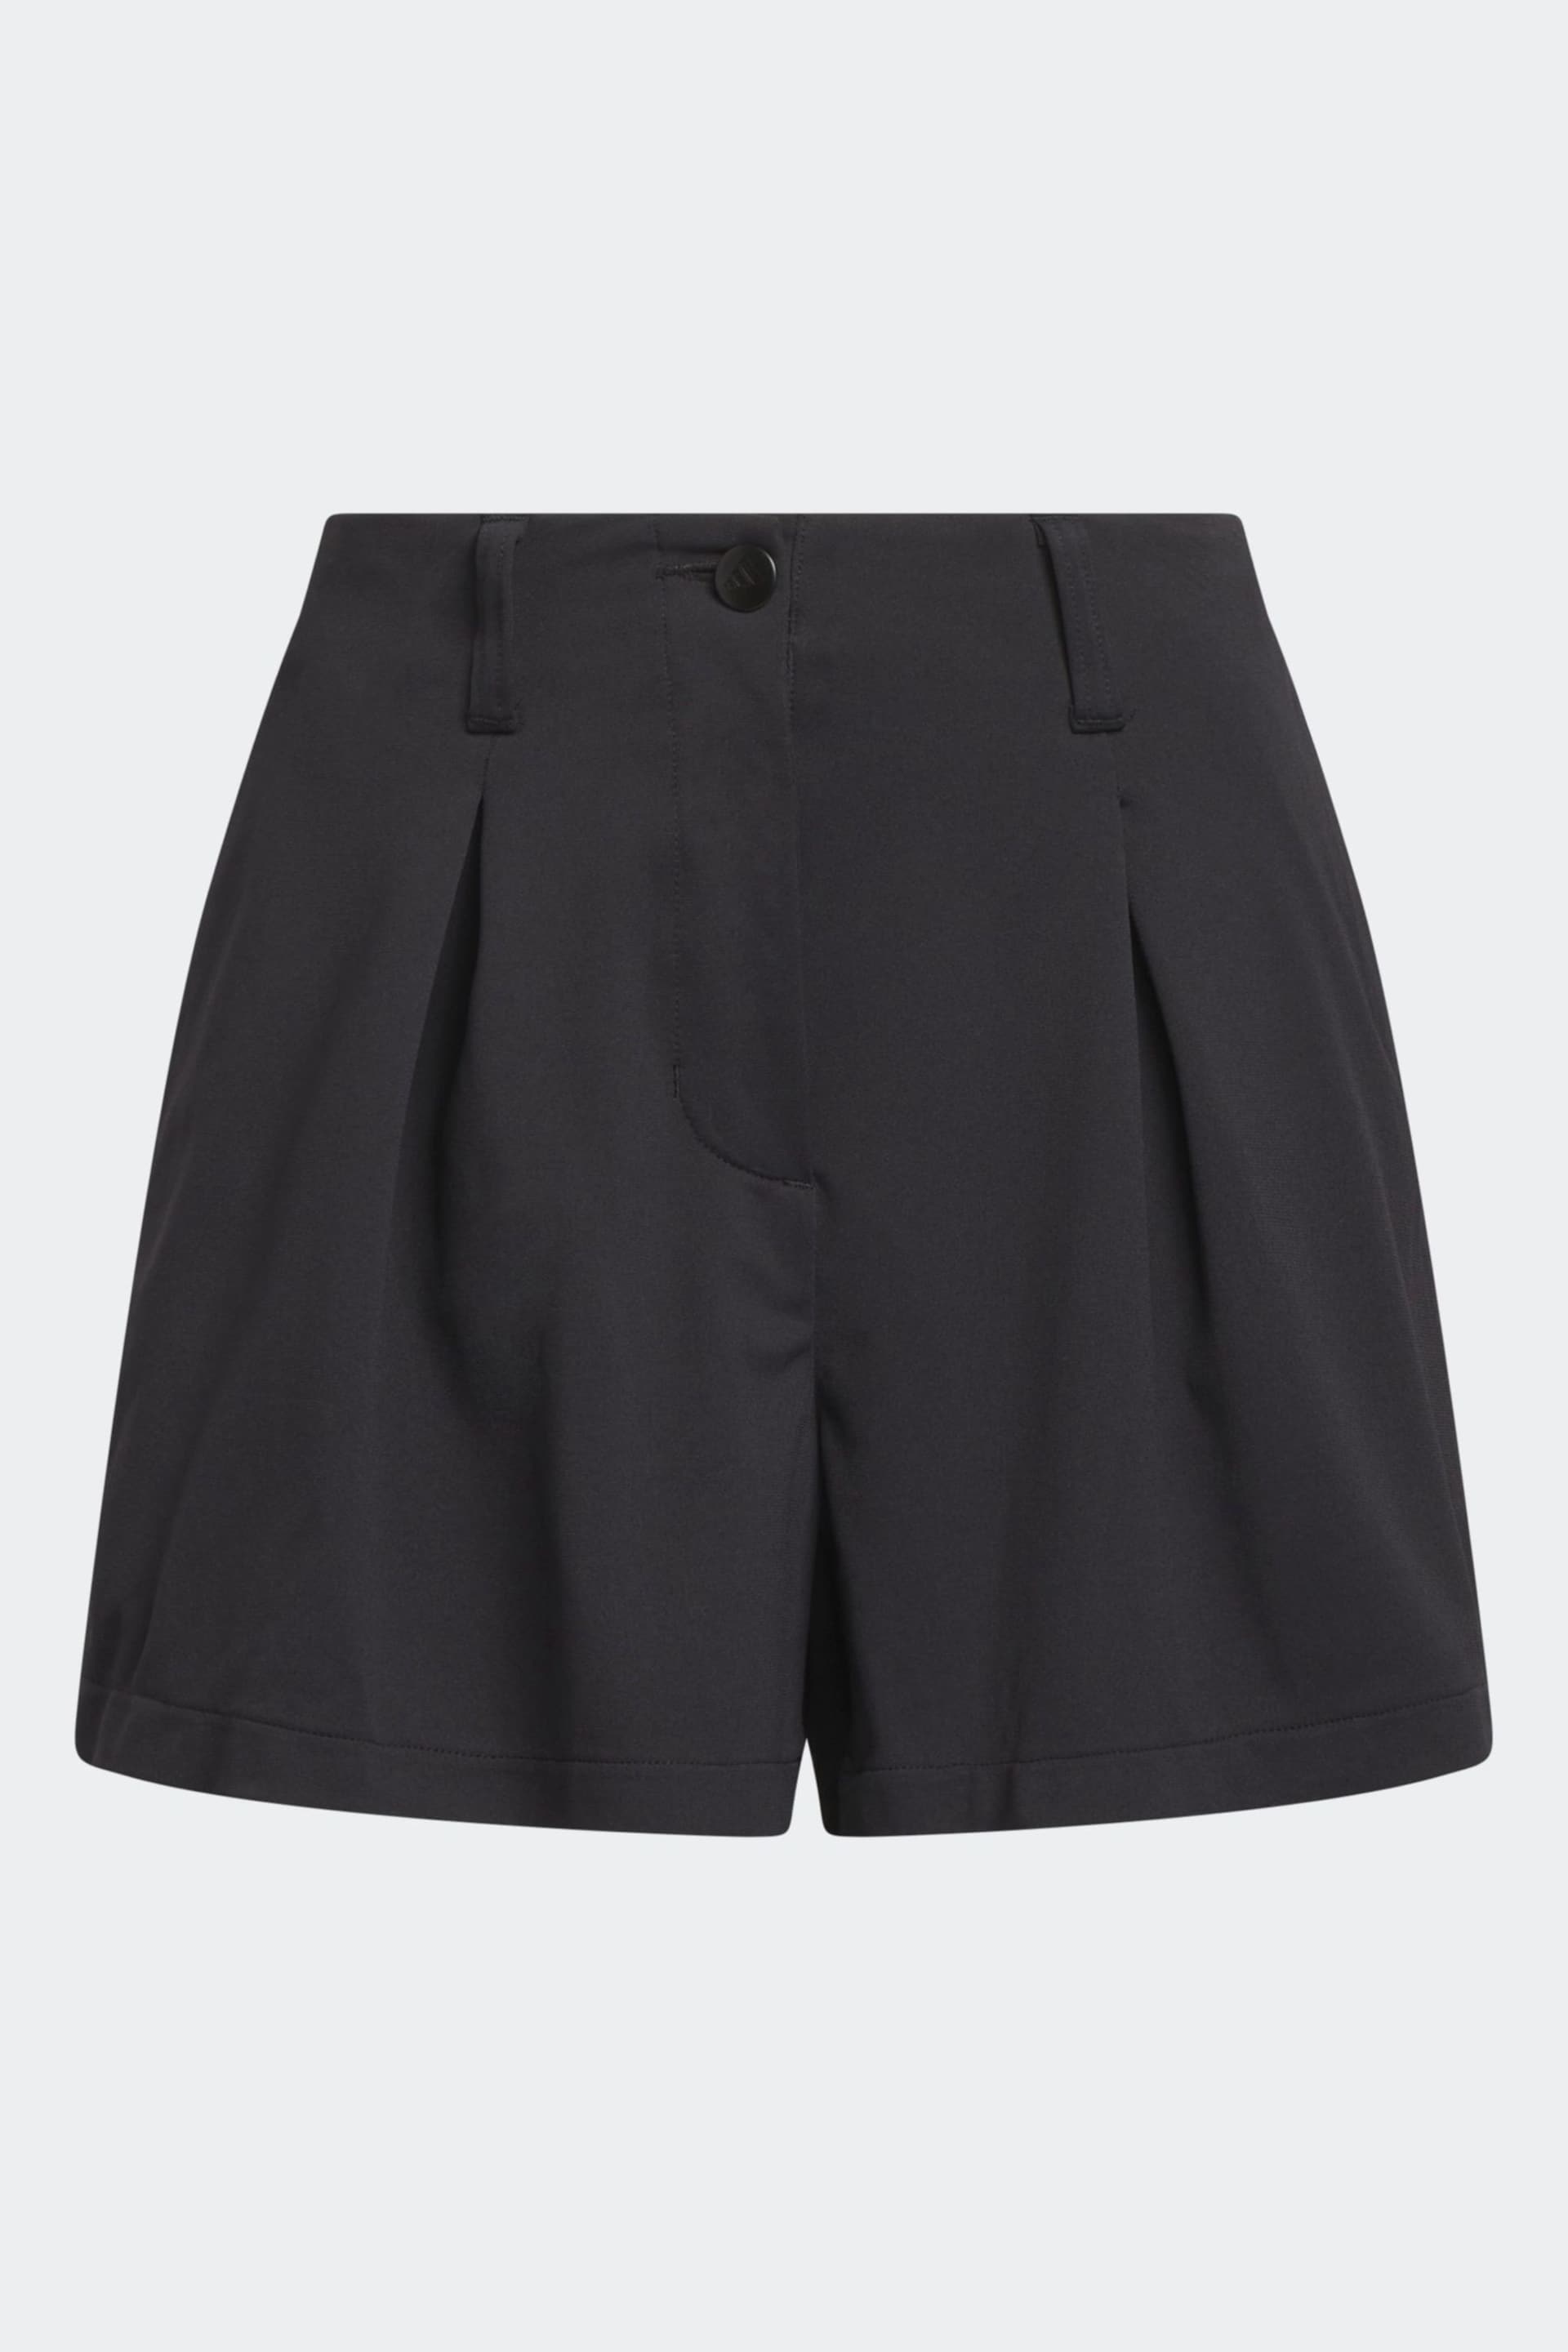 adidas Golf Go-To Pleated Shorts - Image 8 of 8